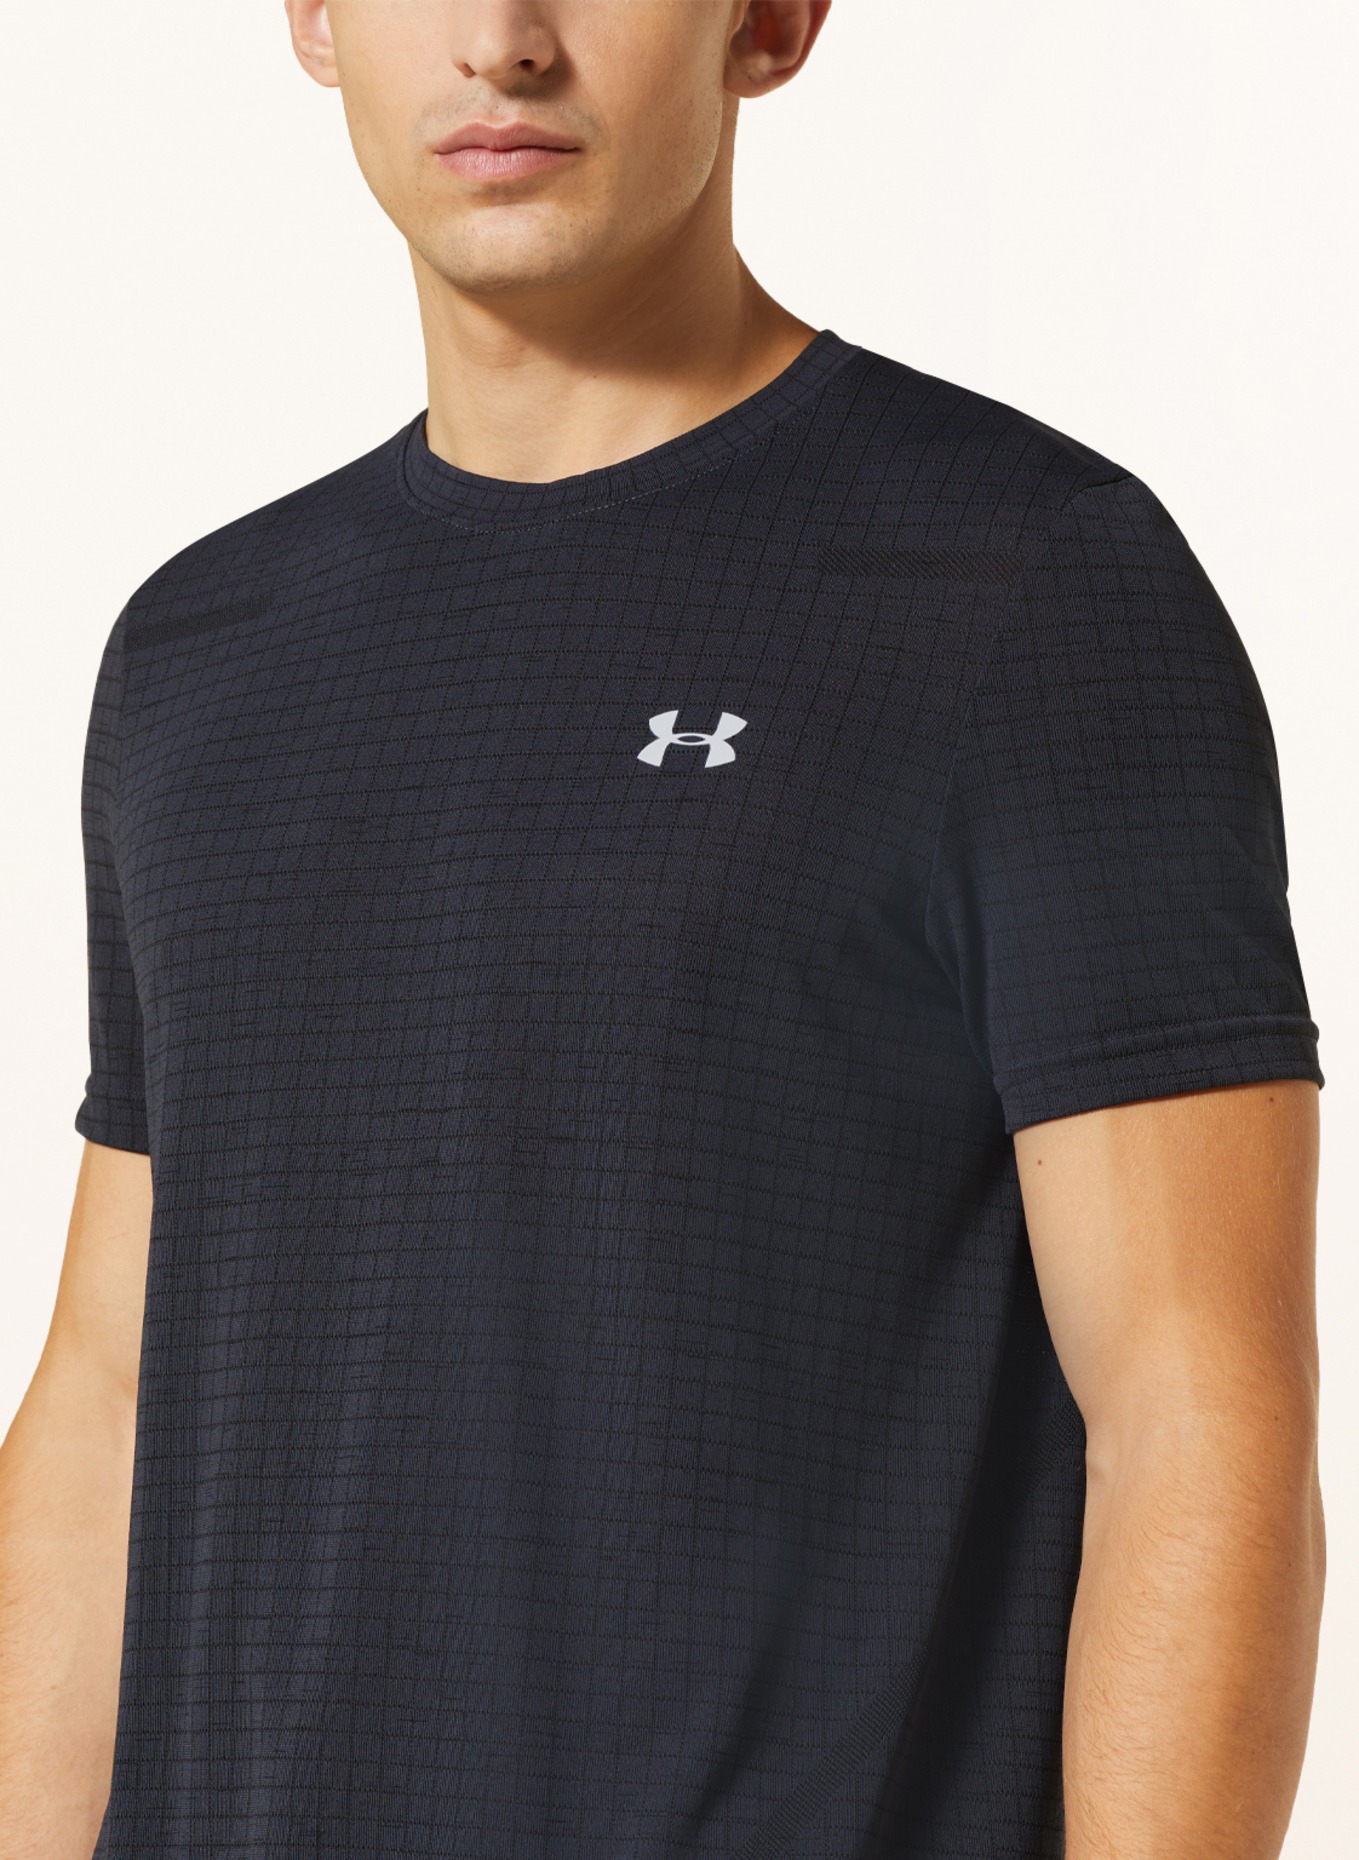 UNDER ARMOUR T-shirt SEAMLESS GRID with mesh in black